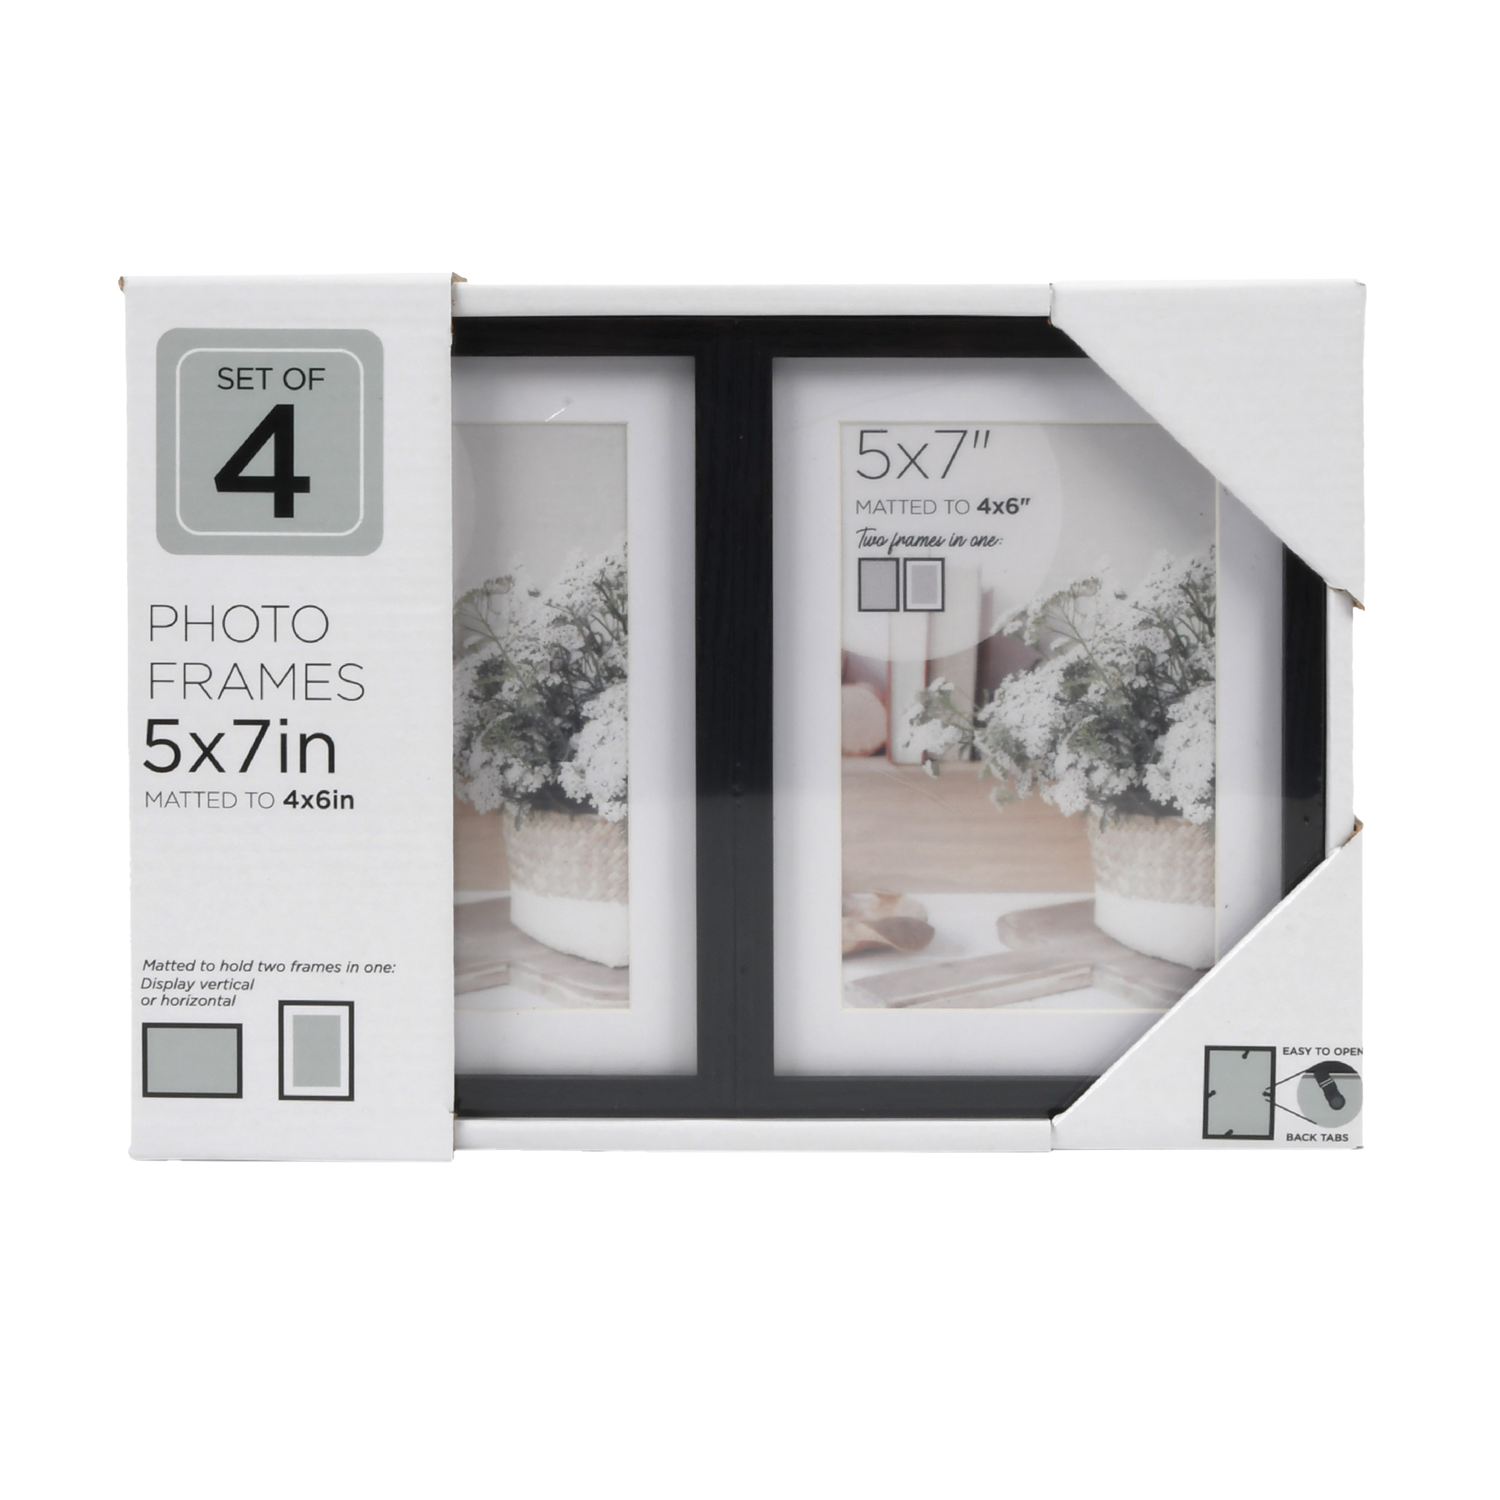 4-Pack 5" x 7" New View Dakota Black Linear Picture Frame Set (Matted for 4" x 6" Photos) for Wall or Desktop $4.47 ($1.12 Ea) + Free S&H w/ Walmart+ or $35+